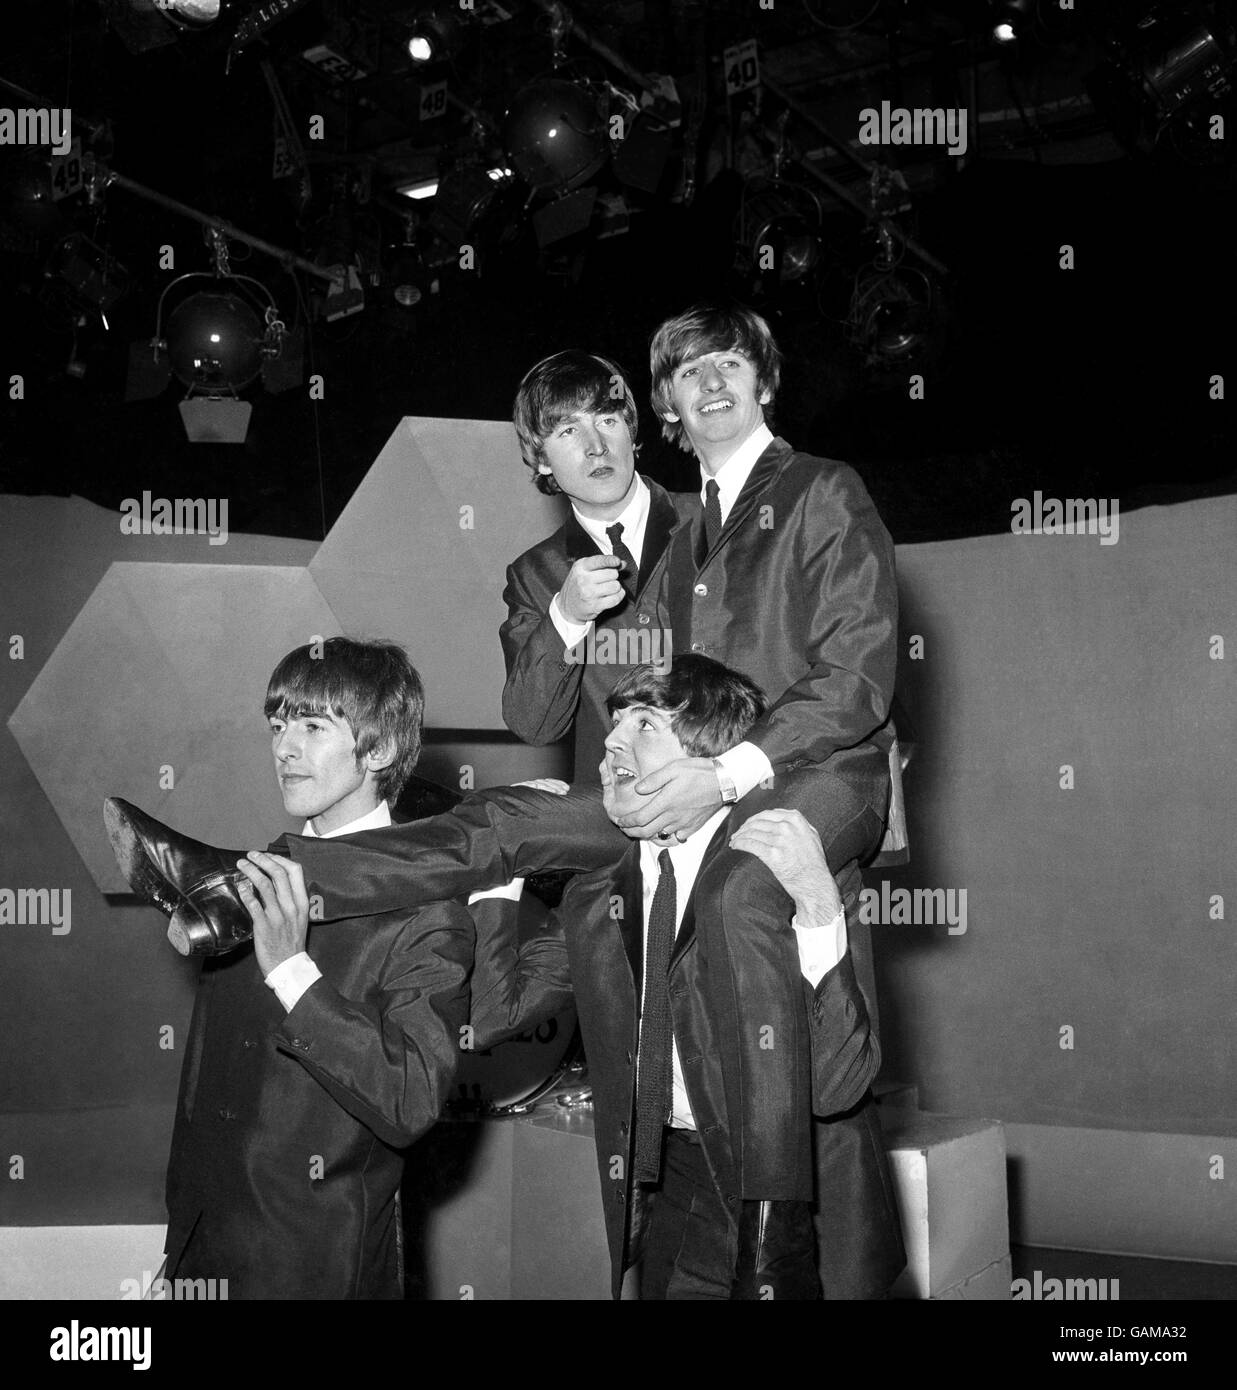 Beatles drummer Ringo Starr on the shoulders of Paul McCartney at the BBC's Lime Grove studios on his 24th birthday. Other Beatles are, left to right, George Harrison and John Lennon. Stock Photo